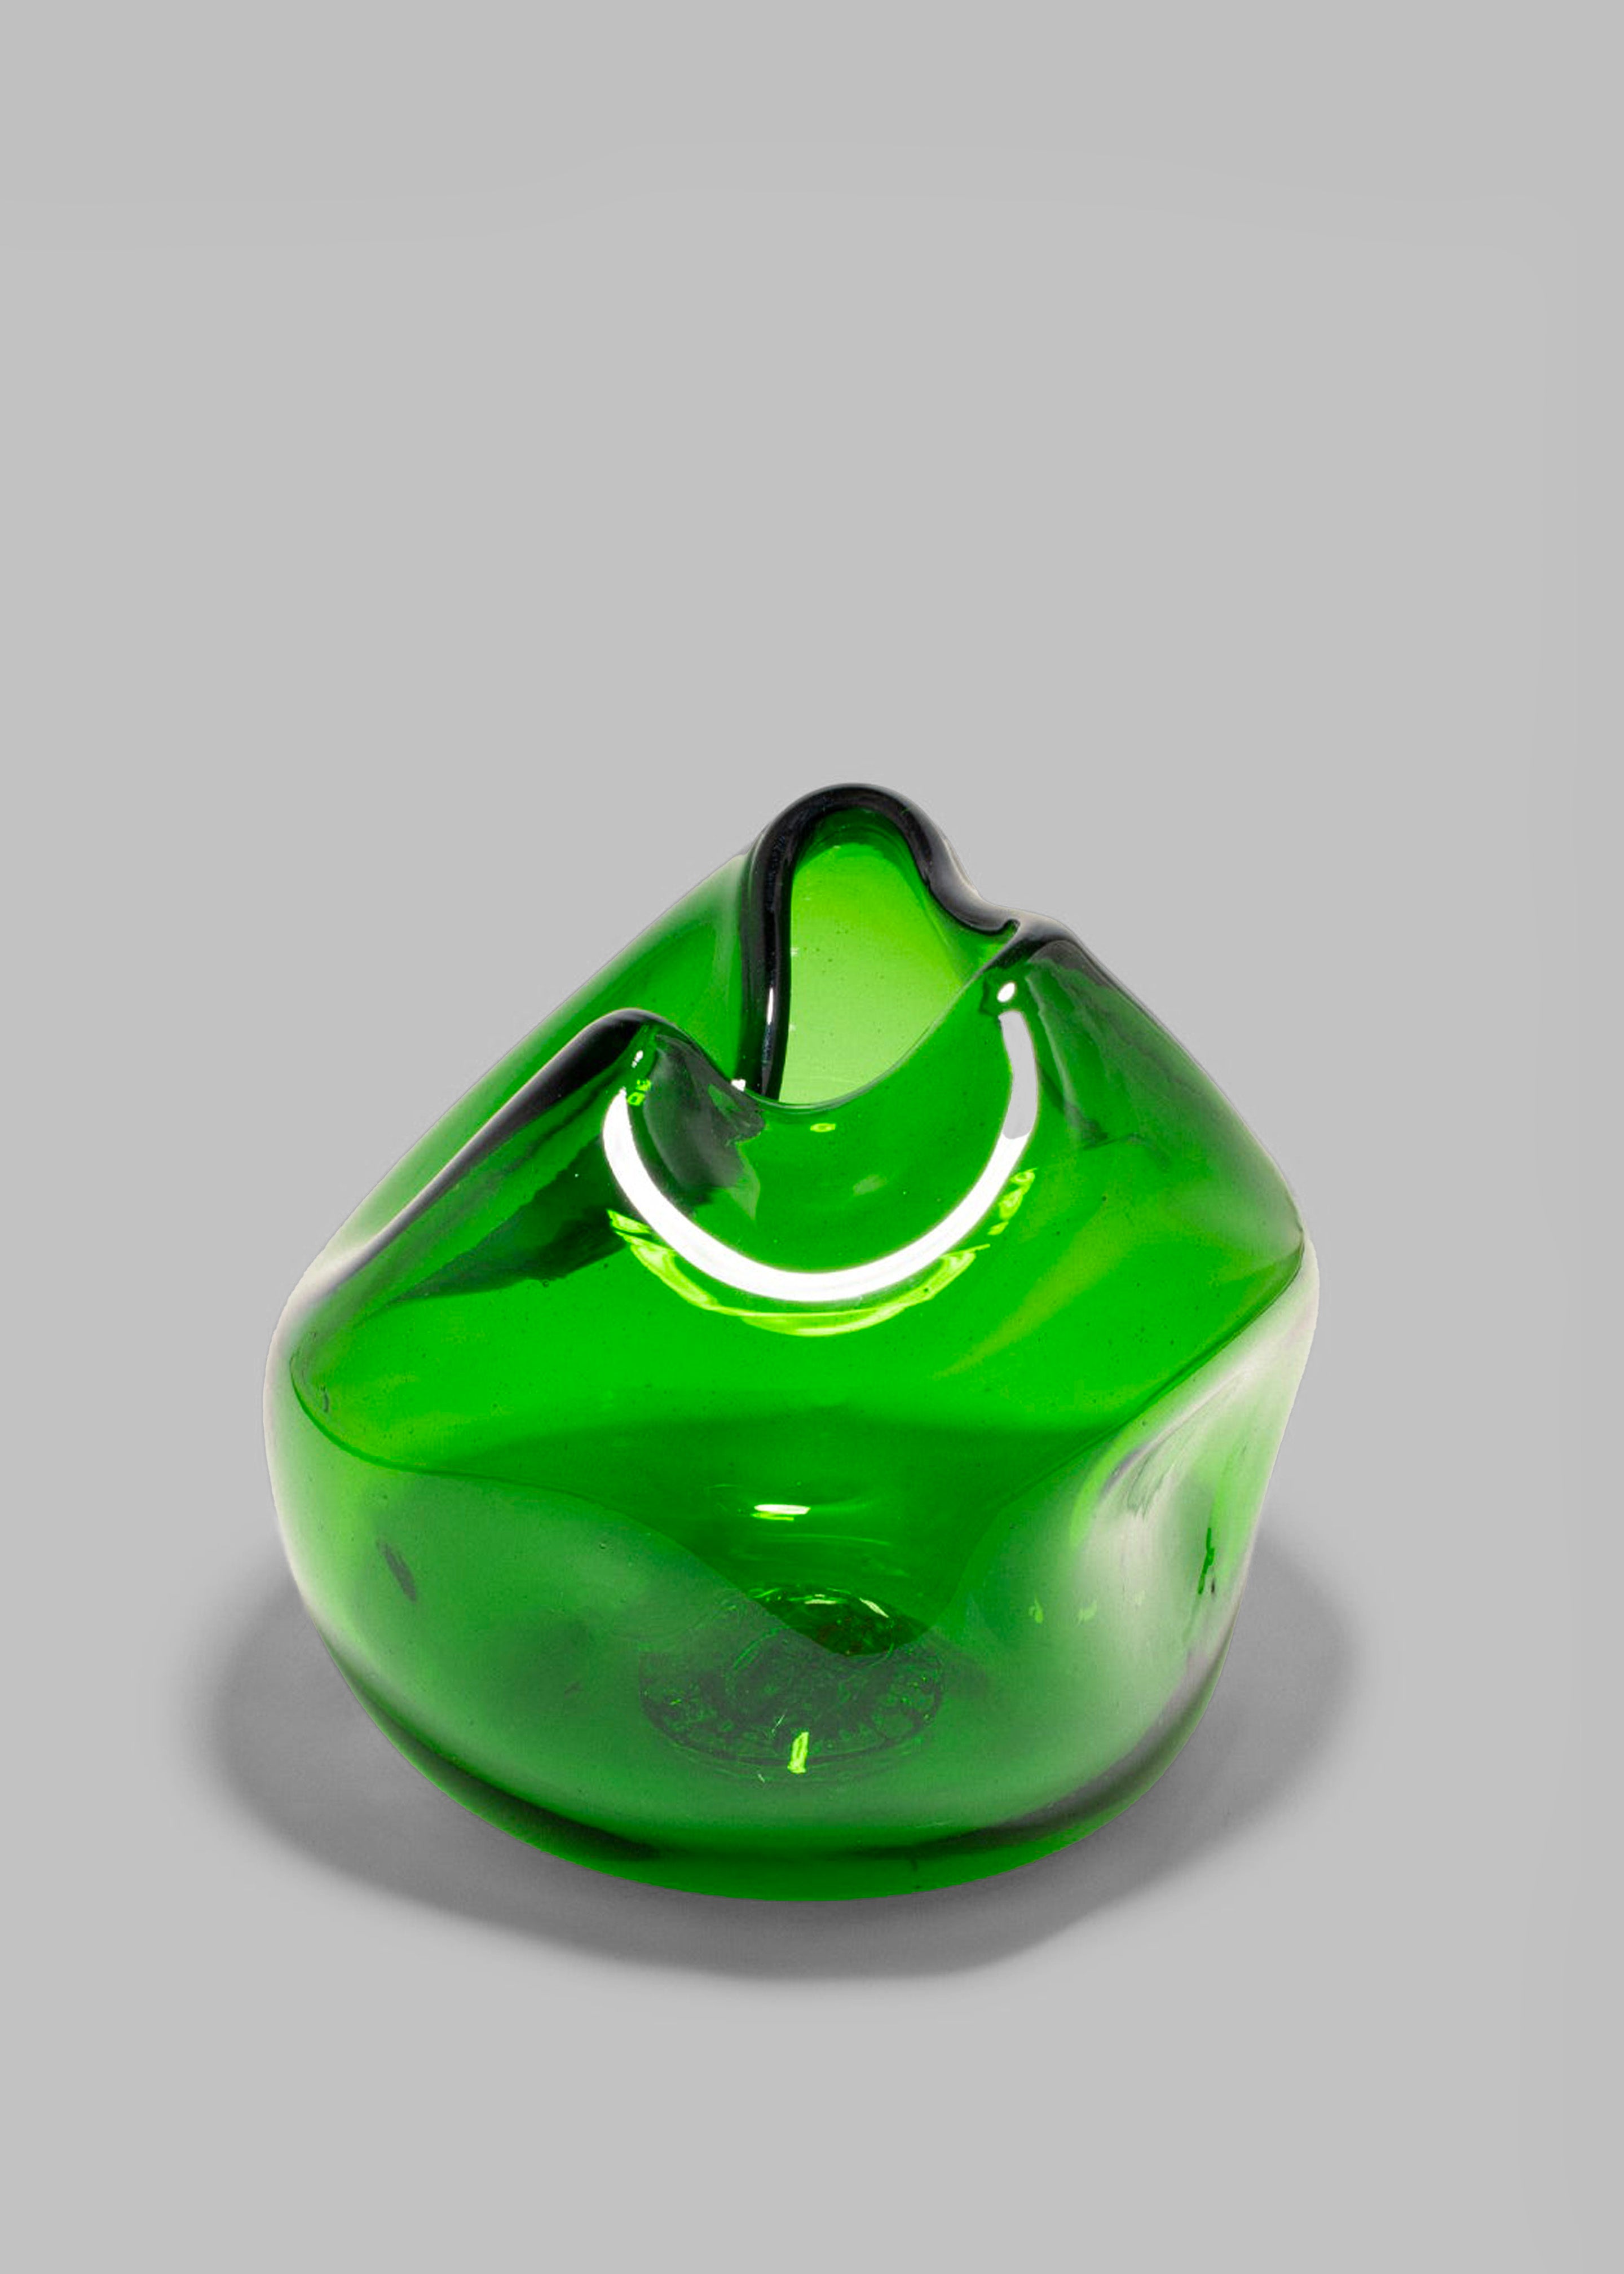 Completedworks The Bubble to End all Bubbles Vase - Green - 5